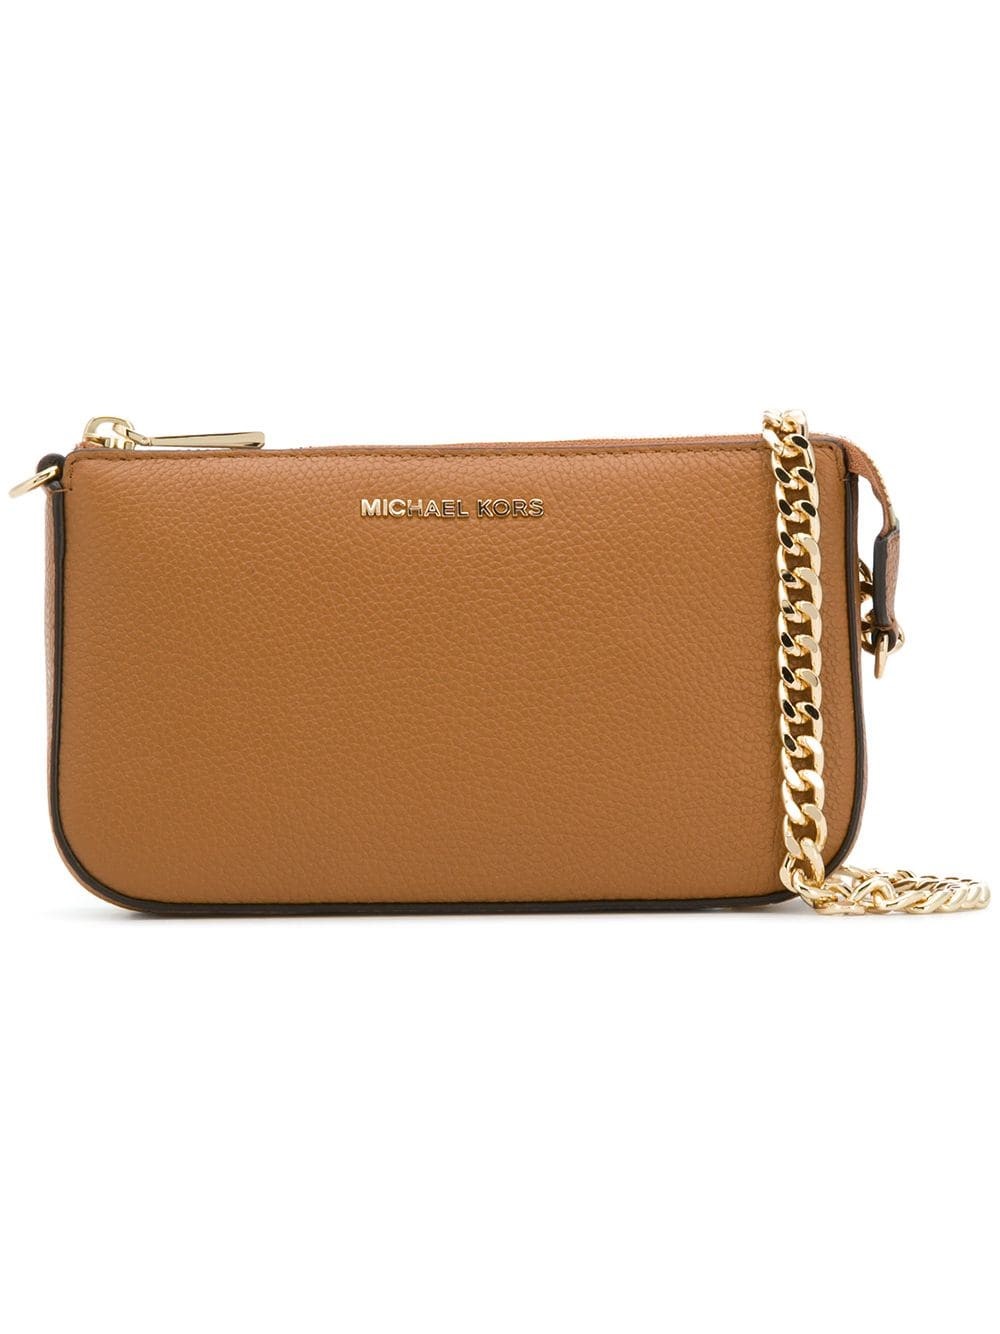 michael kors mk CLUTCH BAG available on 